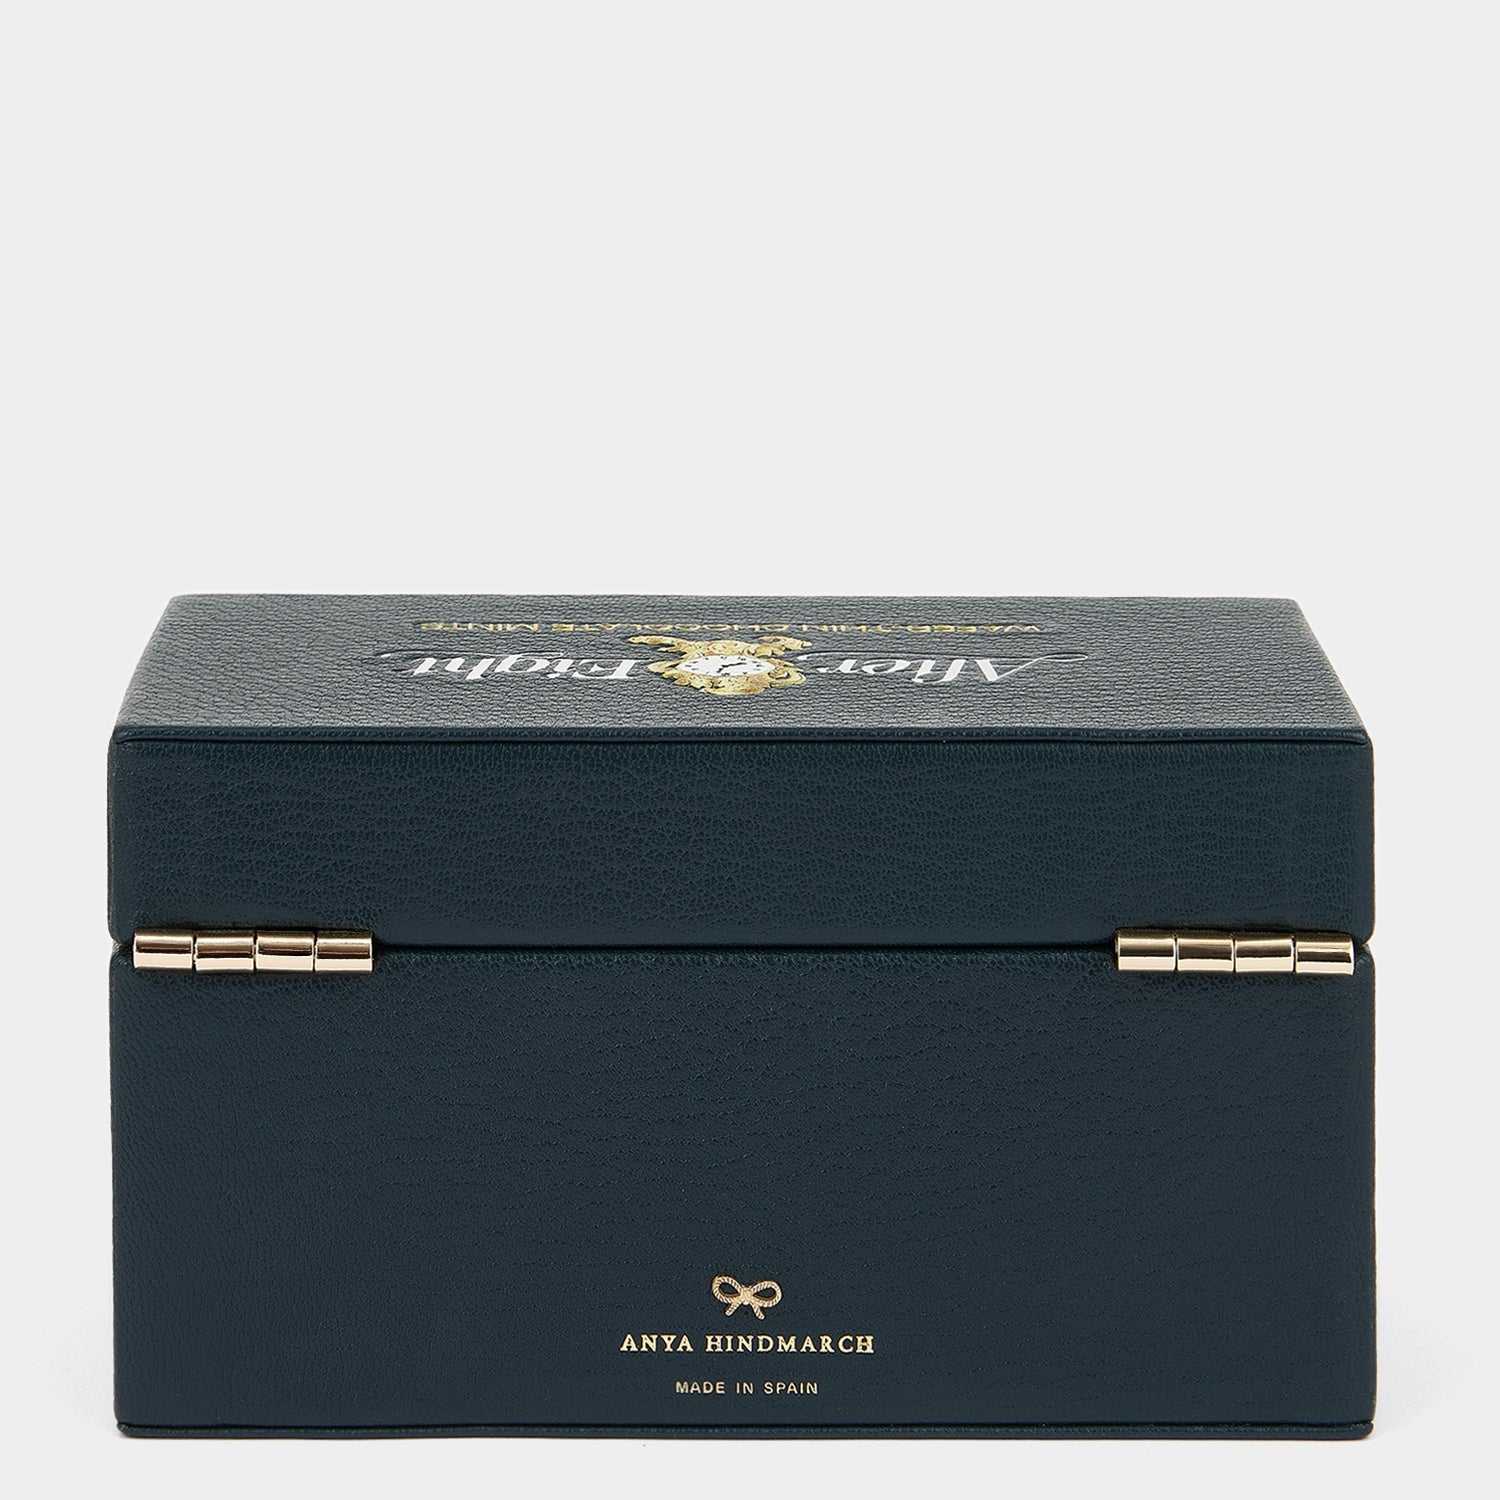 Anya Brands After Eight Box -

                  
                    Capra Leather in Dark Holly -
                  

                  Anya Hindmarch EU
